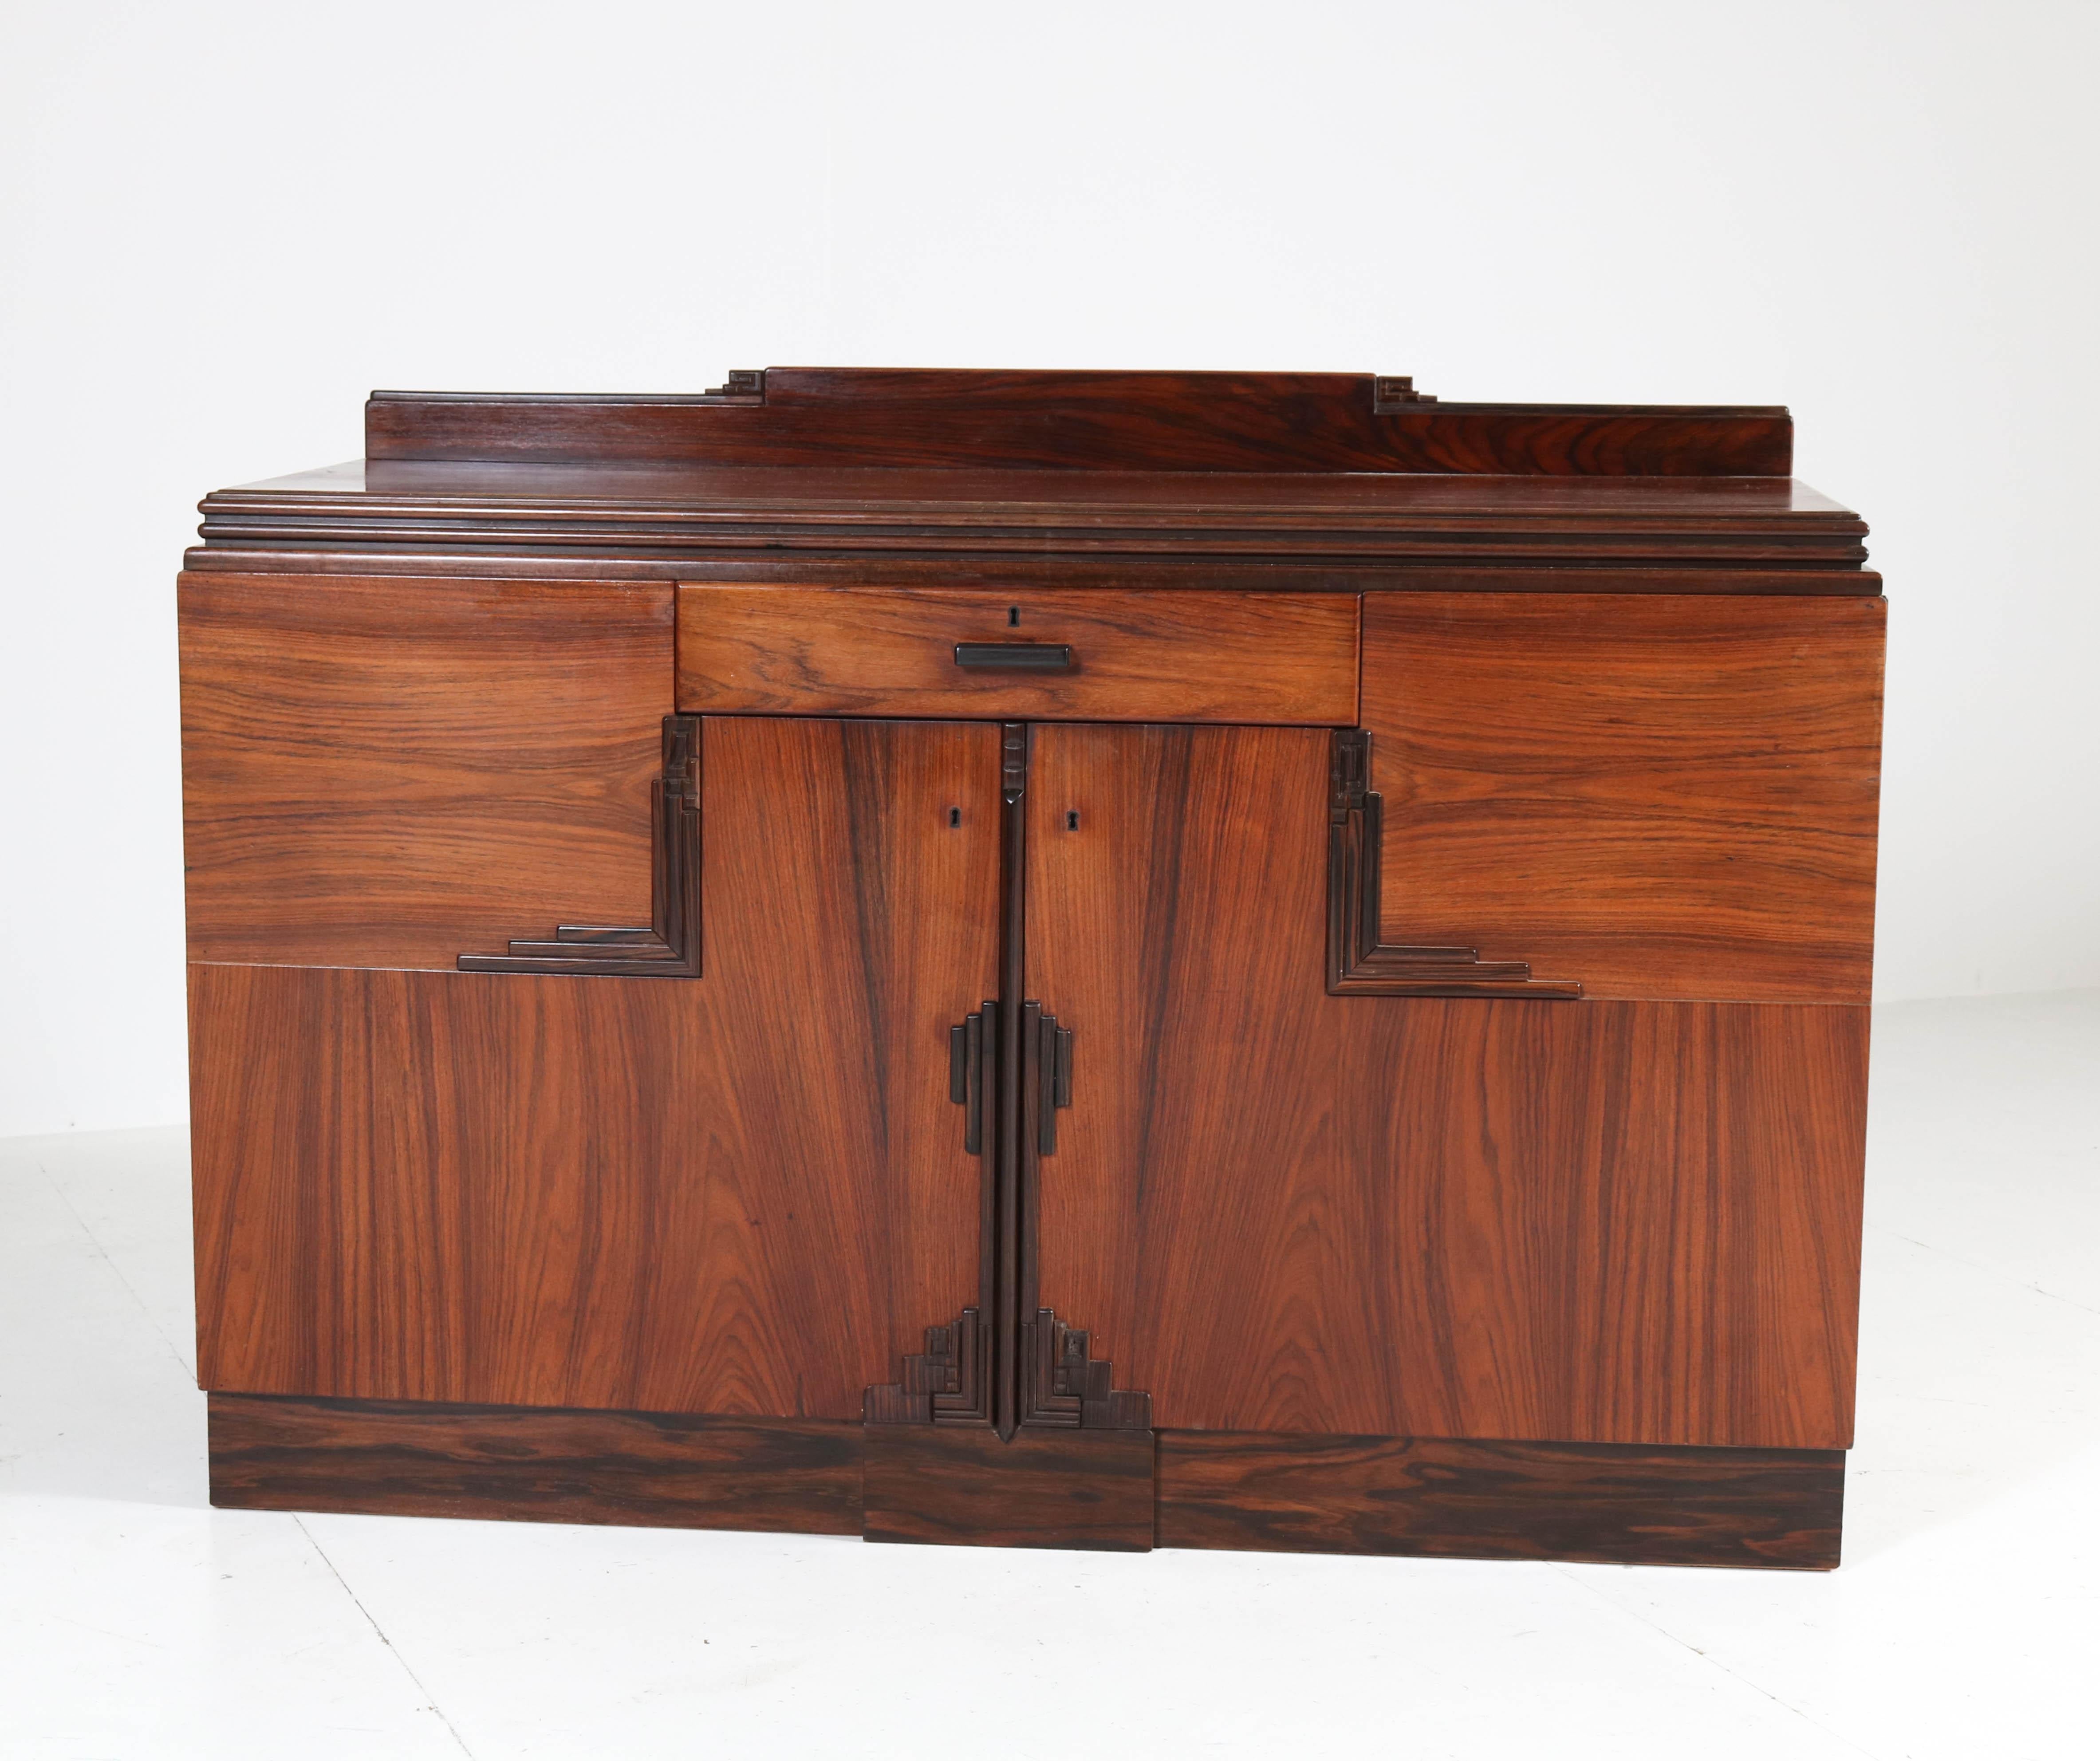 Magnificent and rare Art Deco Amsterdam School credenza or sideboard.
Design by Fa. Drilling Amsterdam.
Striking Dutch design from the 1920s.
Rosewood veneer with solid ebony Macassar lining.
In very good refinished condition with minor wear